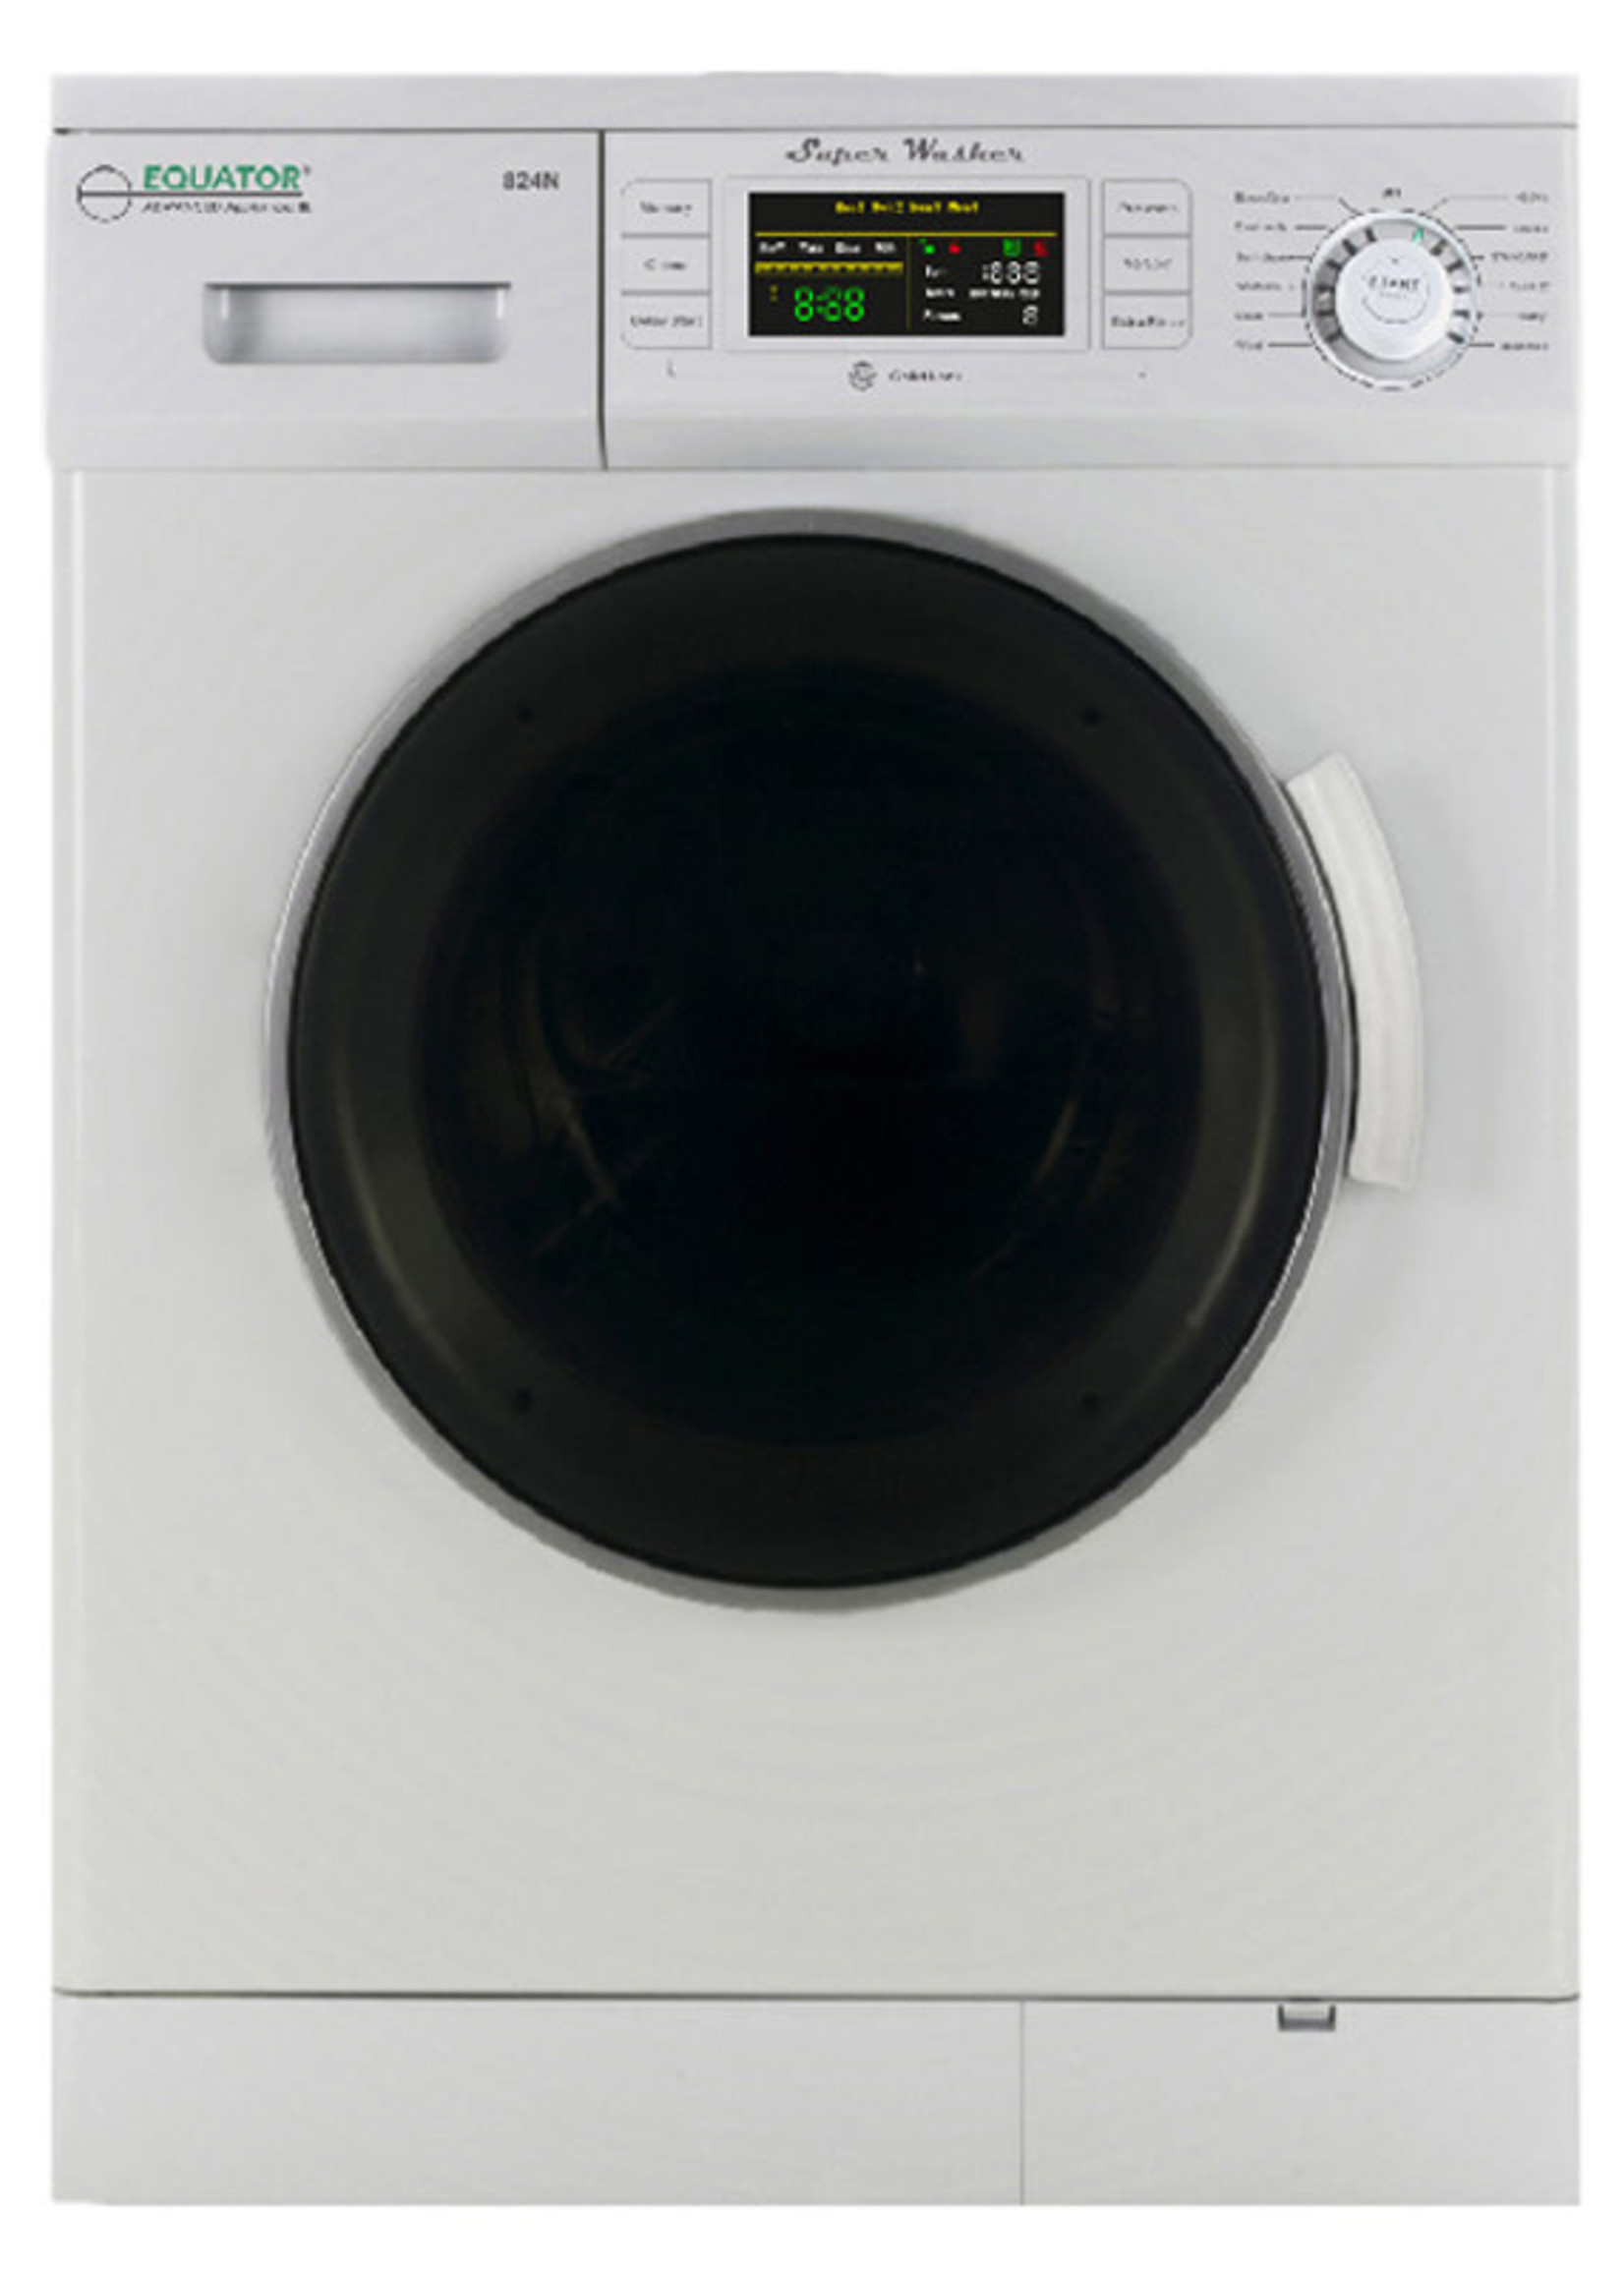 *Equator 824N  1.57 cu. ft. New Version Compact White Front Load Washing Machine with Redesigned Easy to Use Control Panel